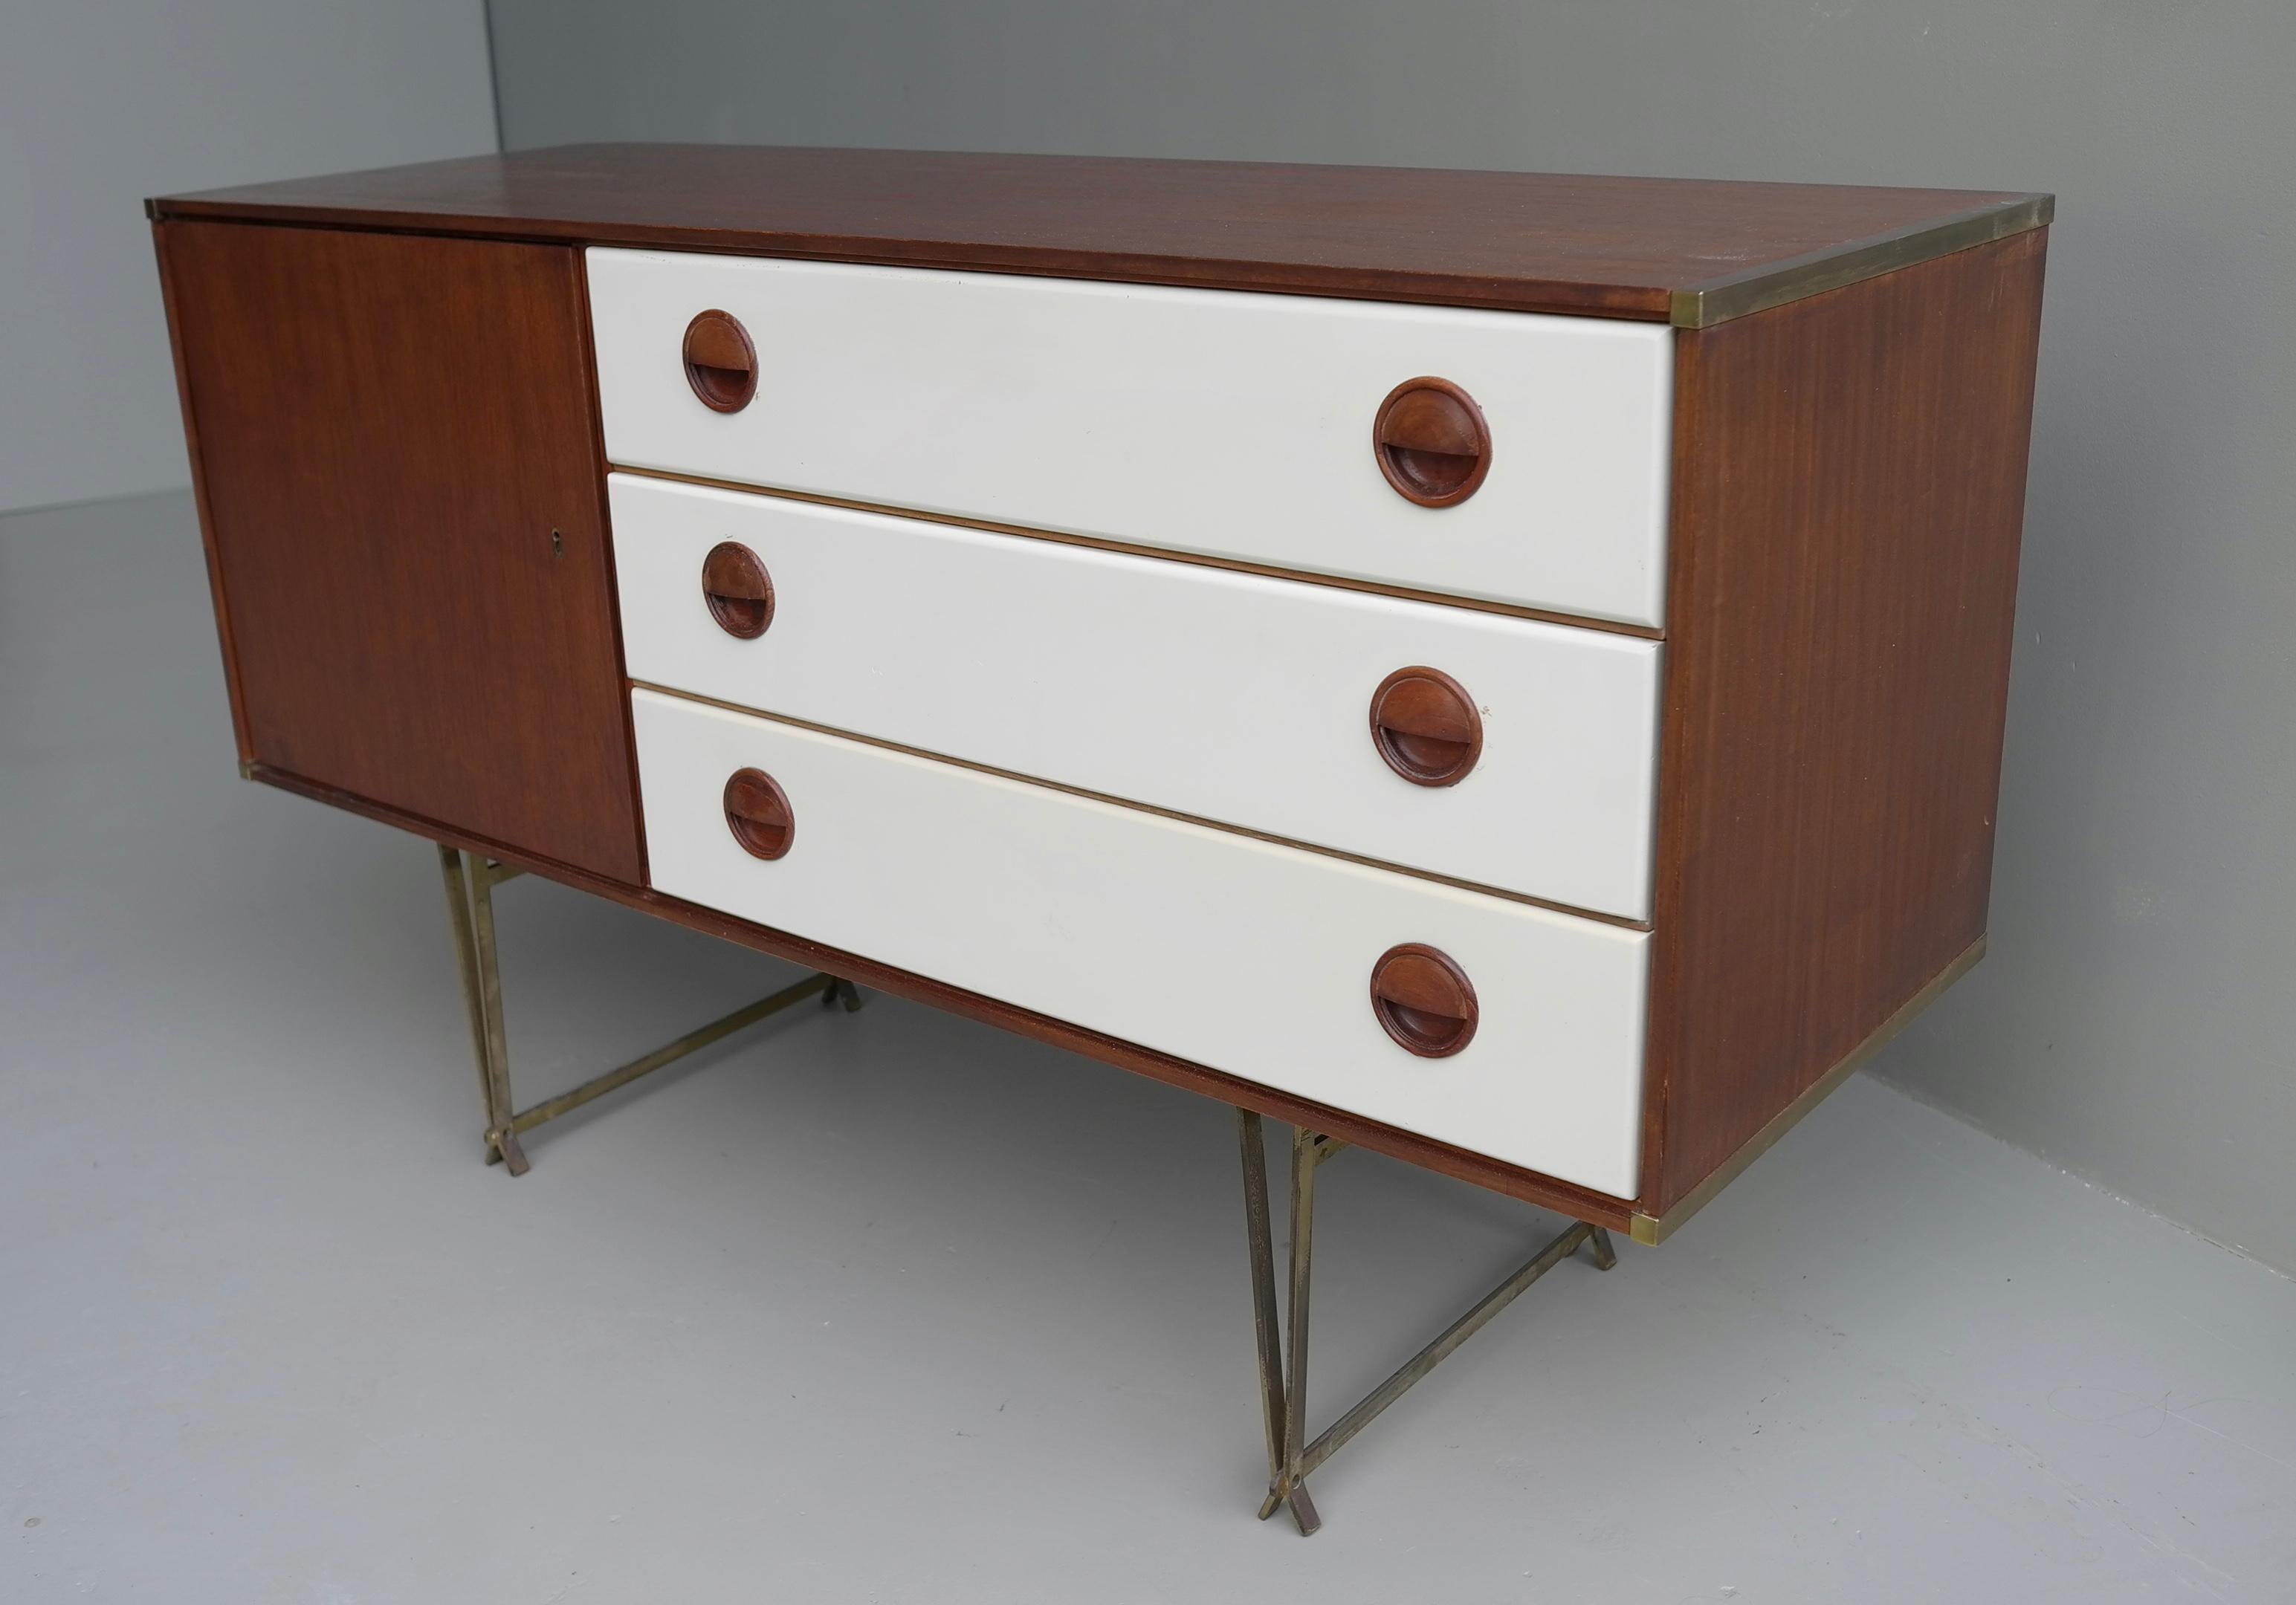 Mid-Century Modern Fristho Sideboard by Wim Crouwel in Teak and White, with Fine Brass Leggs, 1954